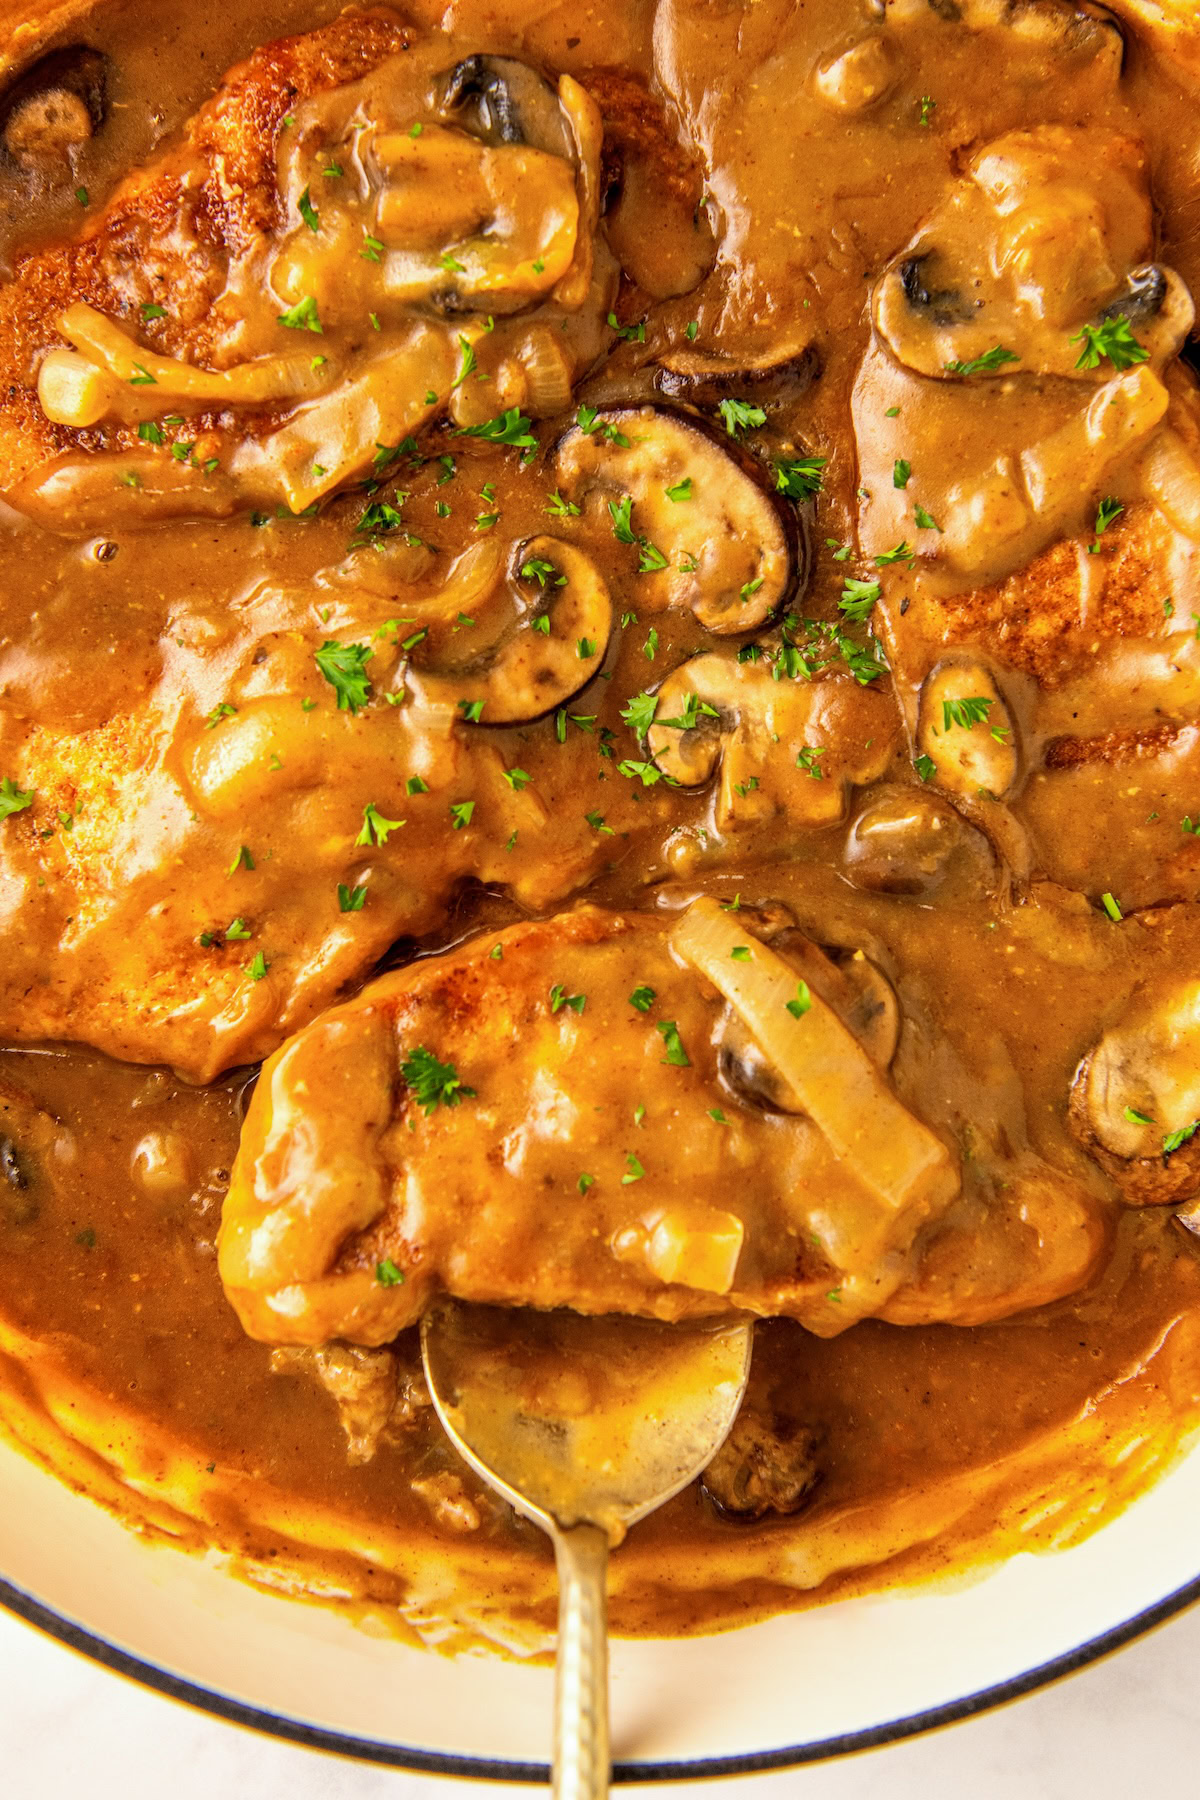 A serving spoon scooping out a tender and juicy smothered pork chops and gravy with mushrooms out of a skillet.